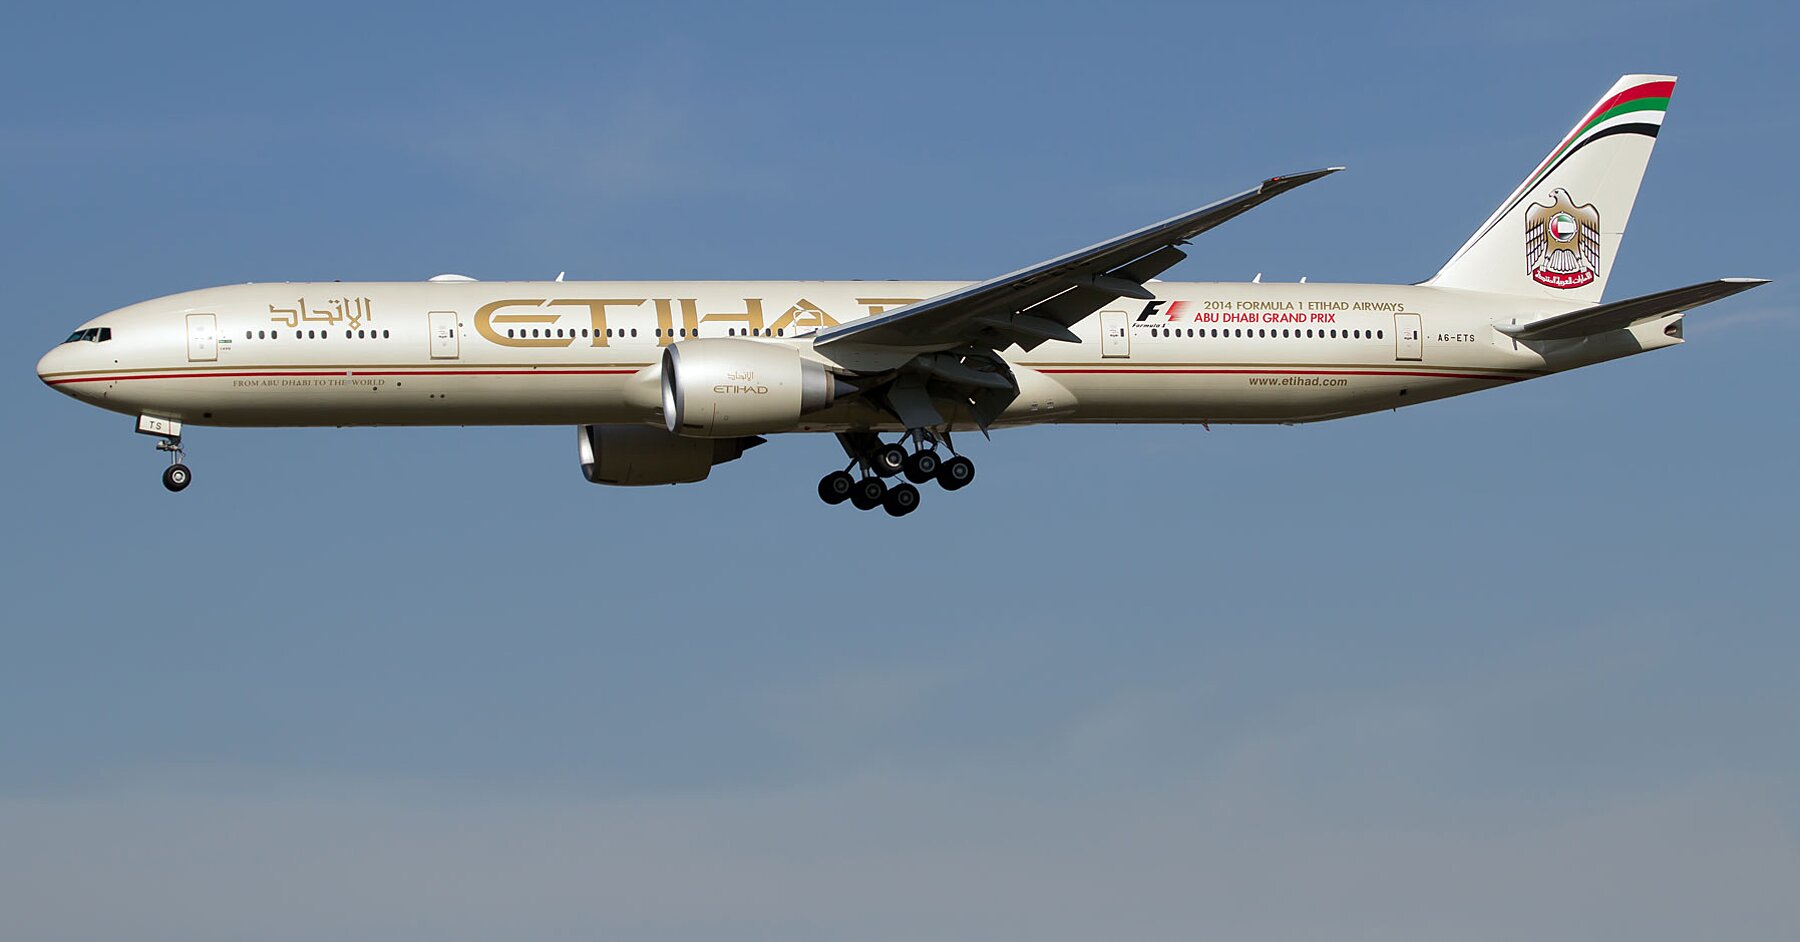 Etihad Airways to Cover Medical Costs, Provide Free Insurance to Passengers If They Contract COVID-19